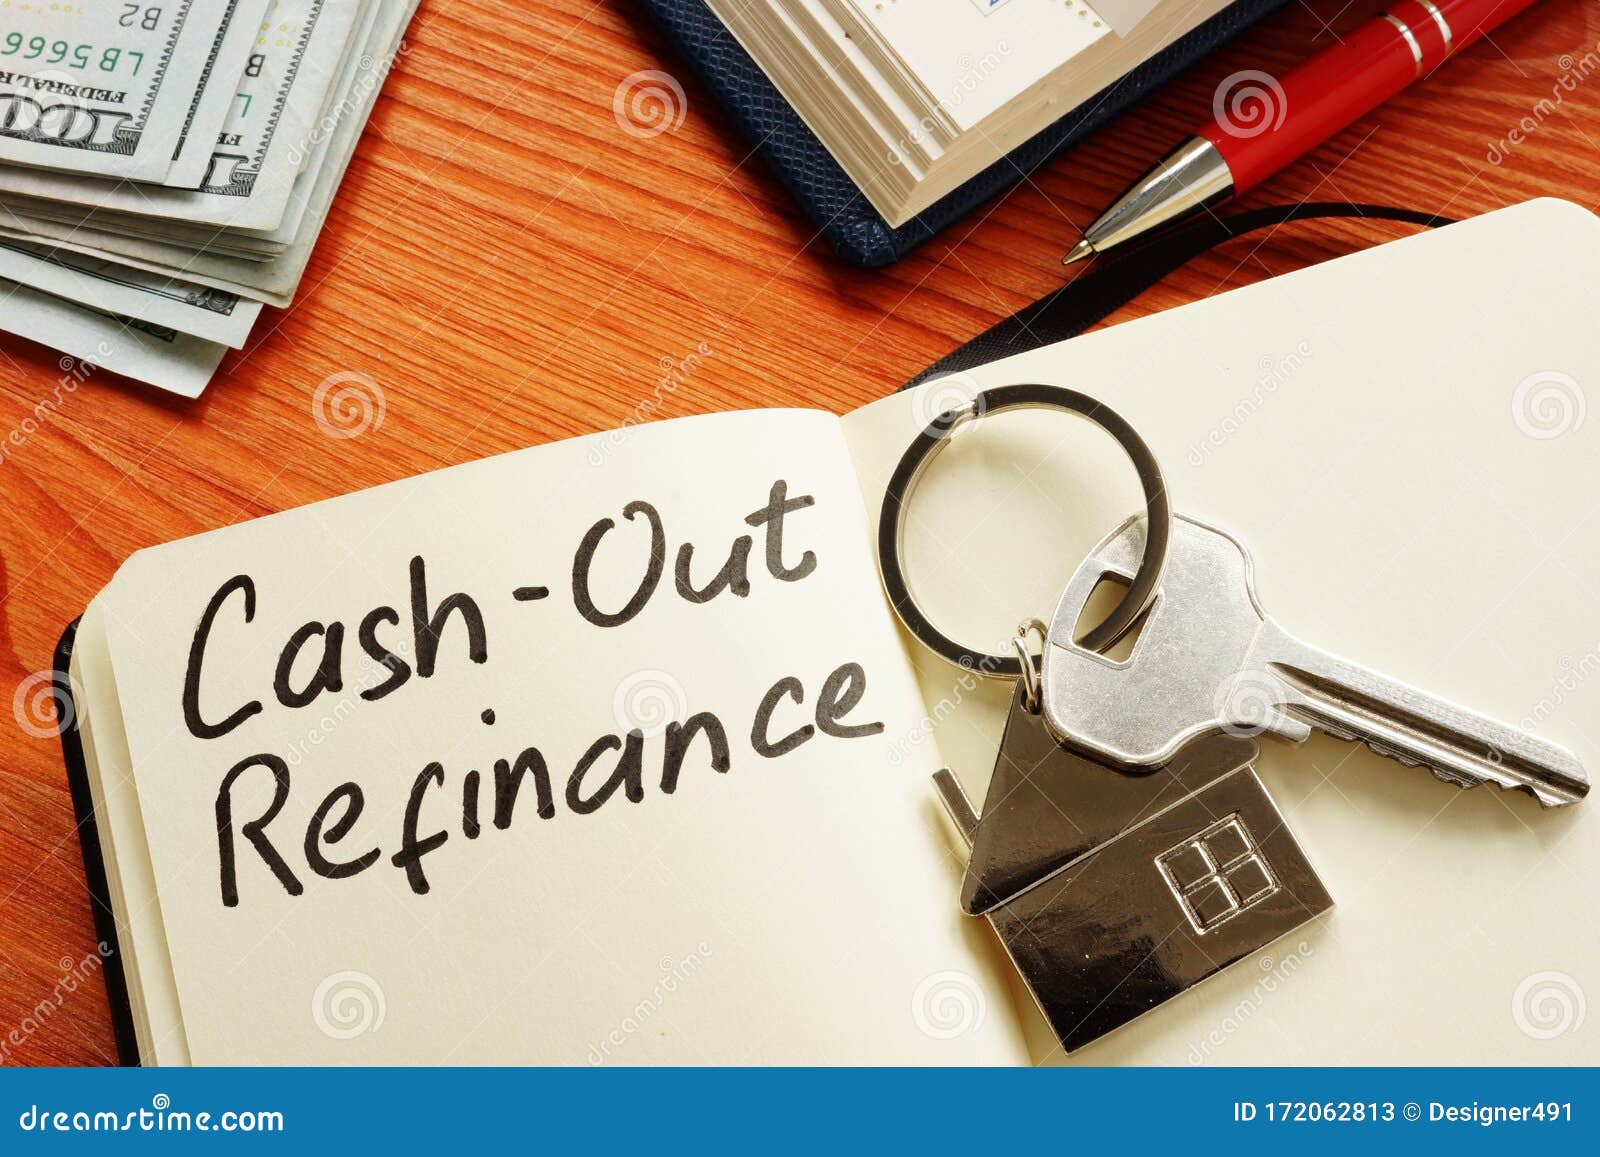 cash out refinance and key on the note.